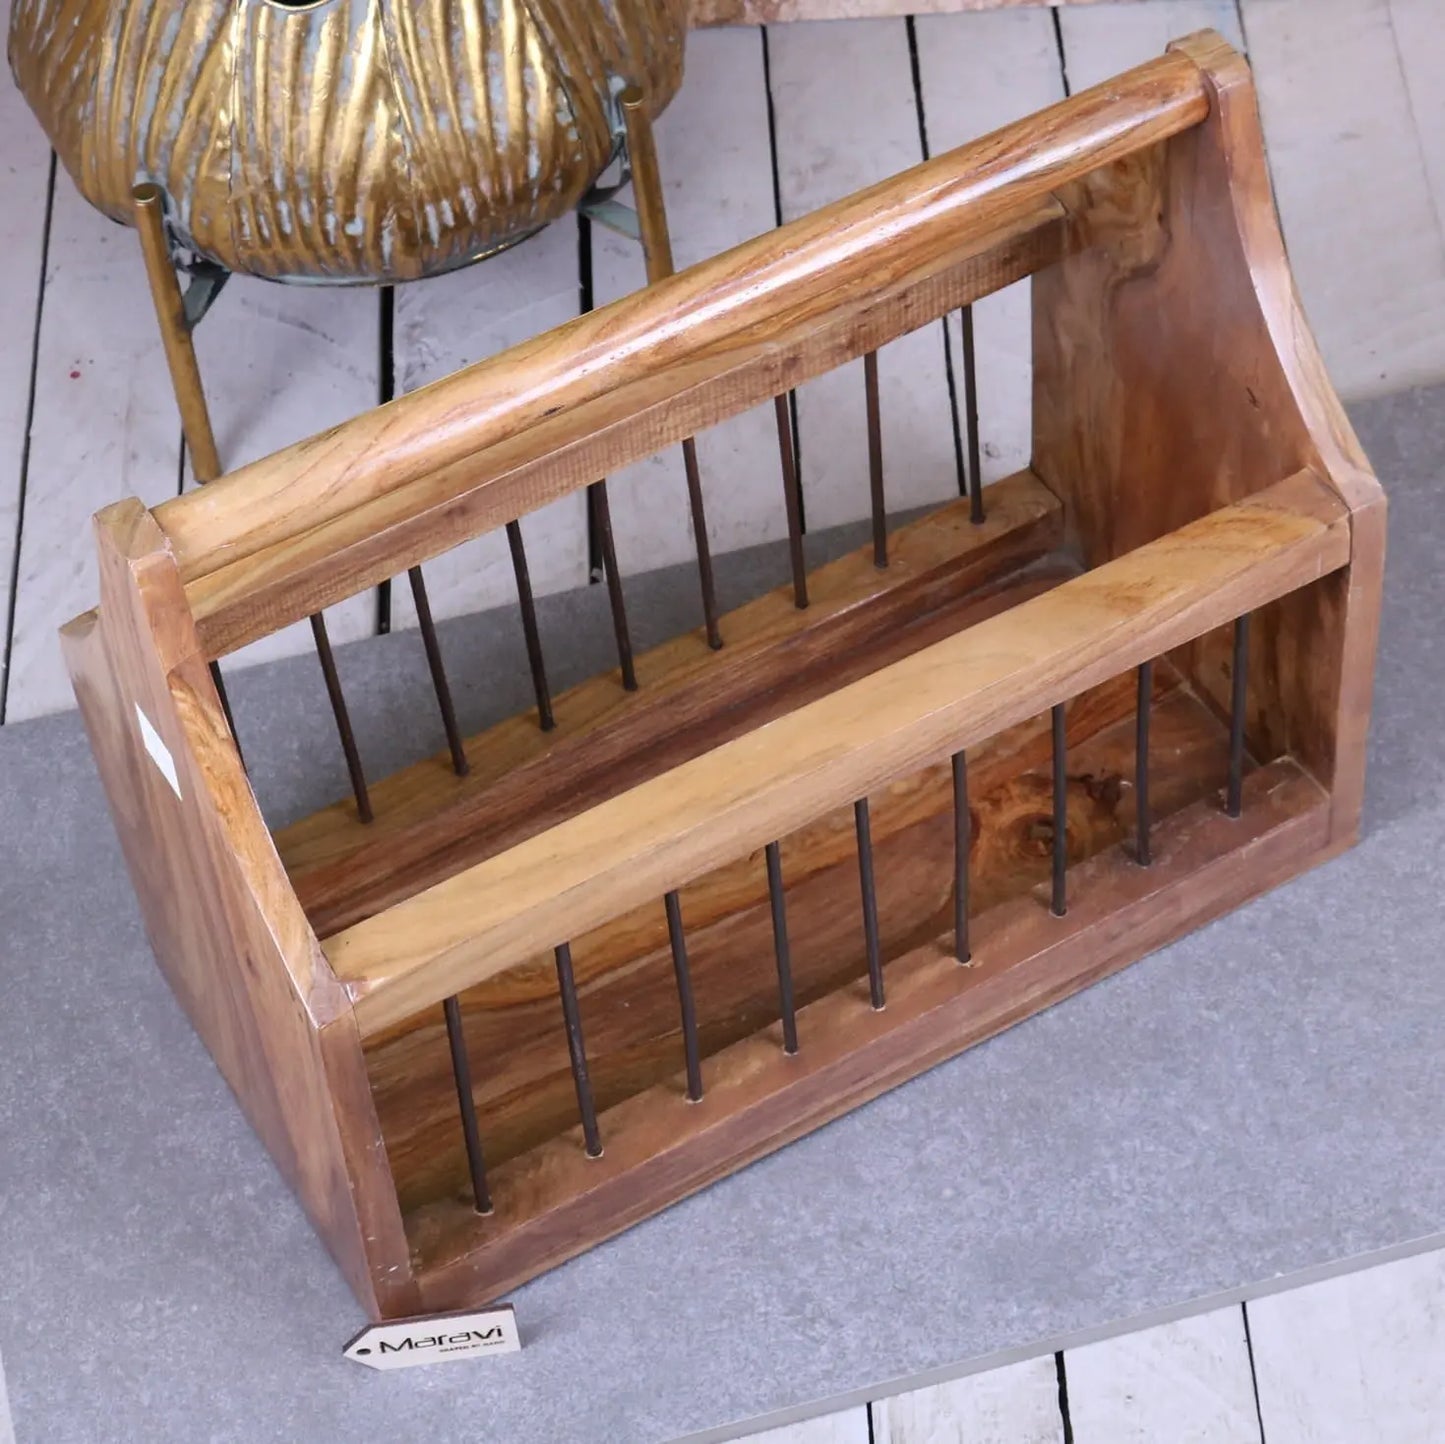 Solid Mango Wood Magazine Rack with Iron Bar Detailing - Top View